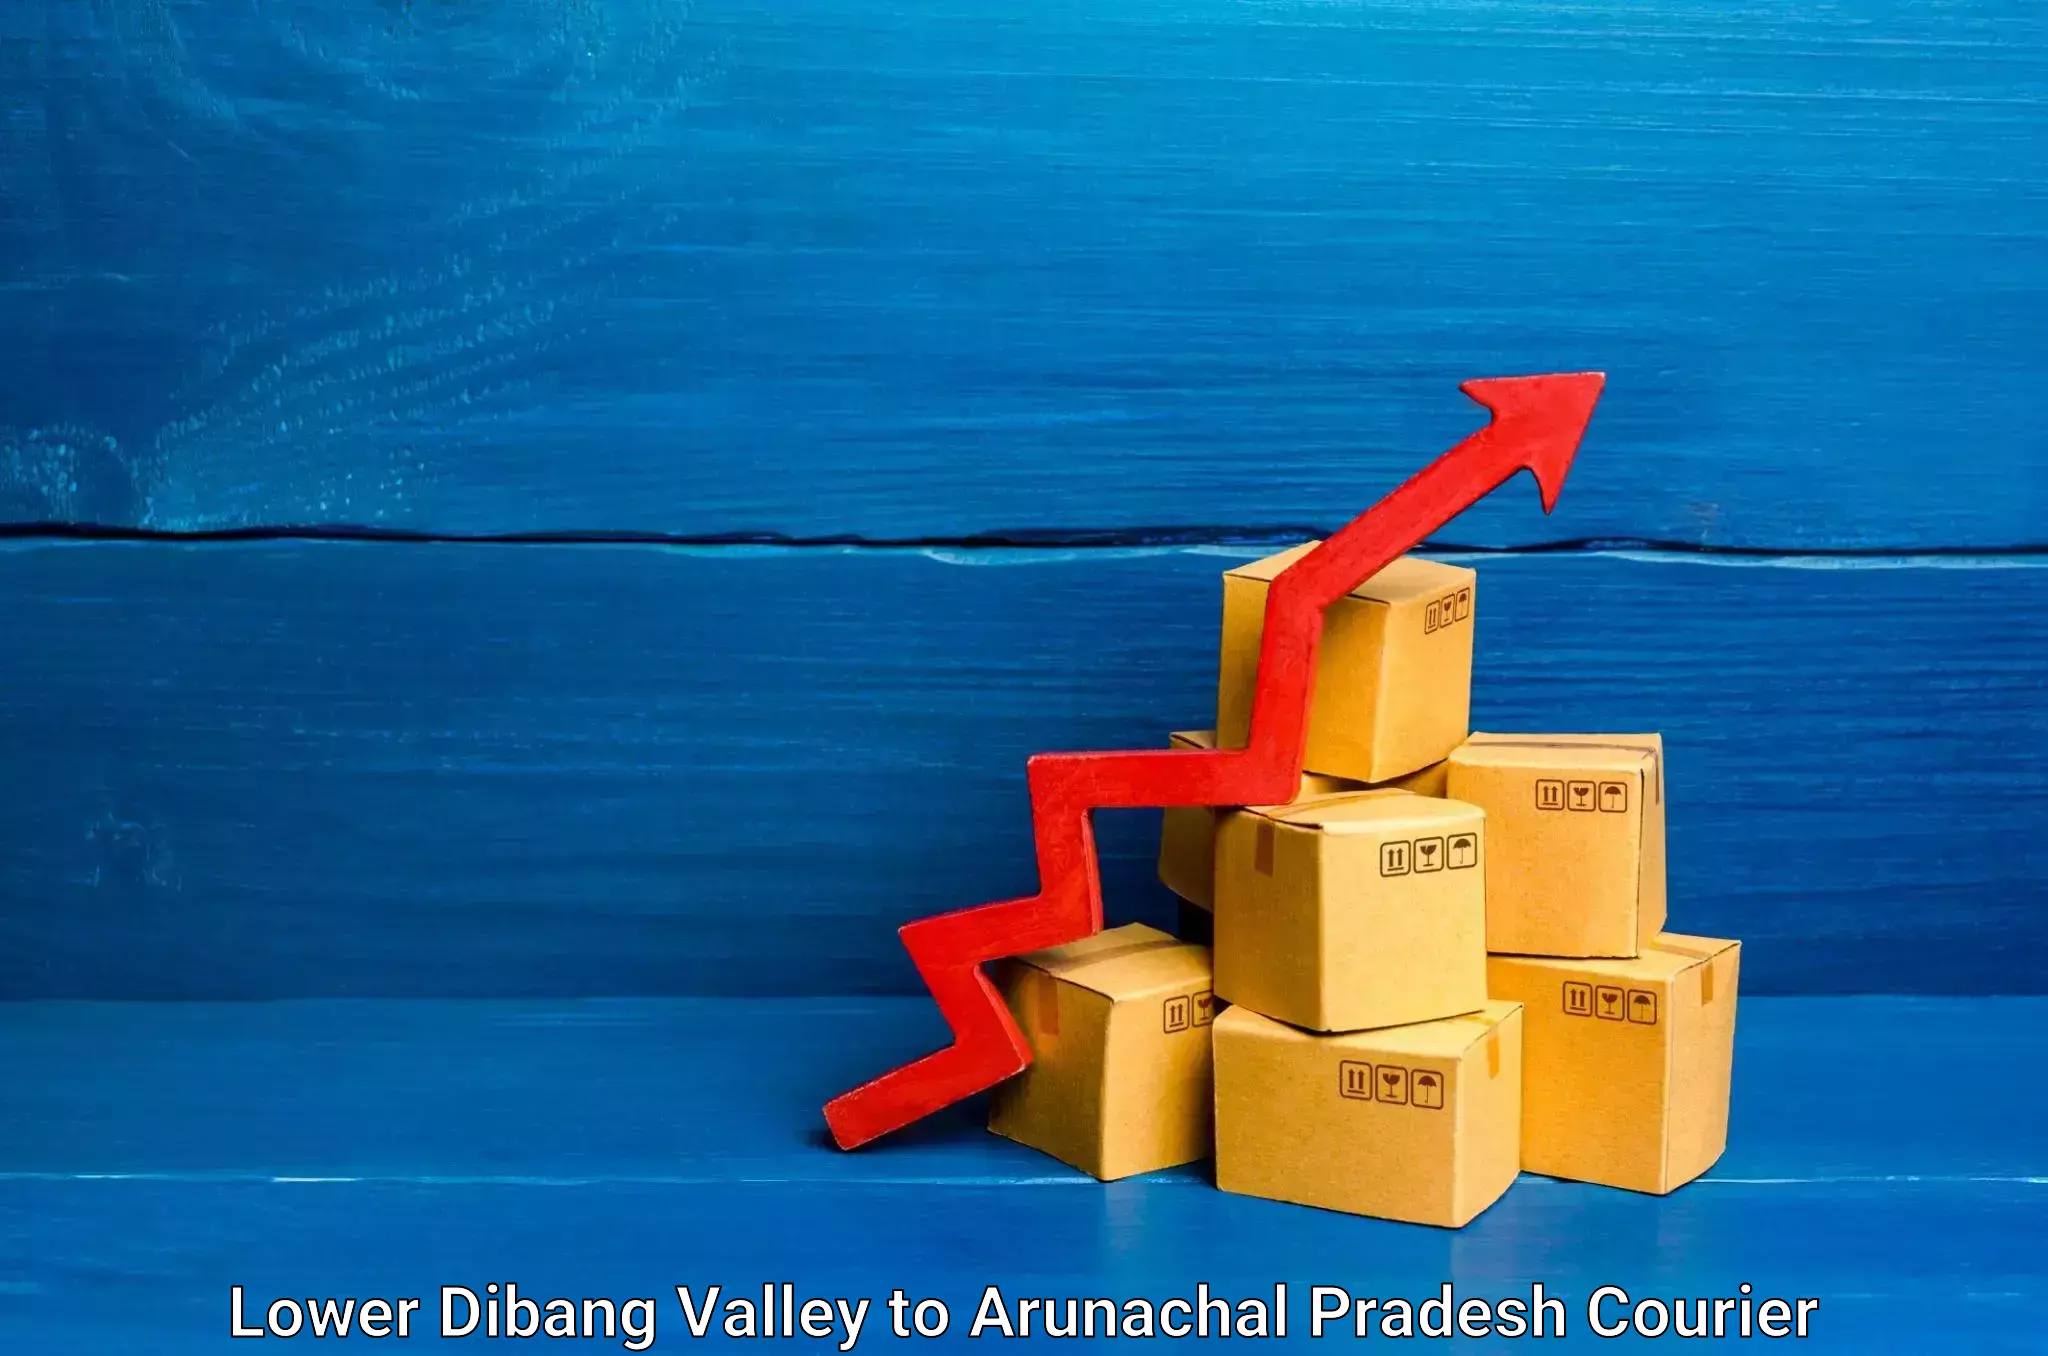 Comprehensive shipping strategies in Lower Dibang Valley to Khonsa